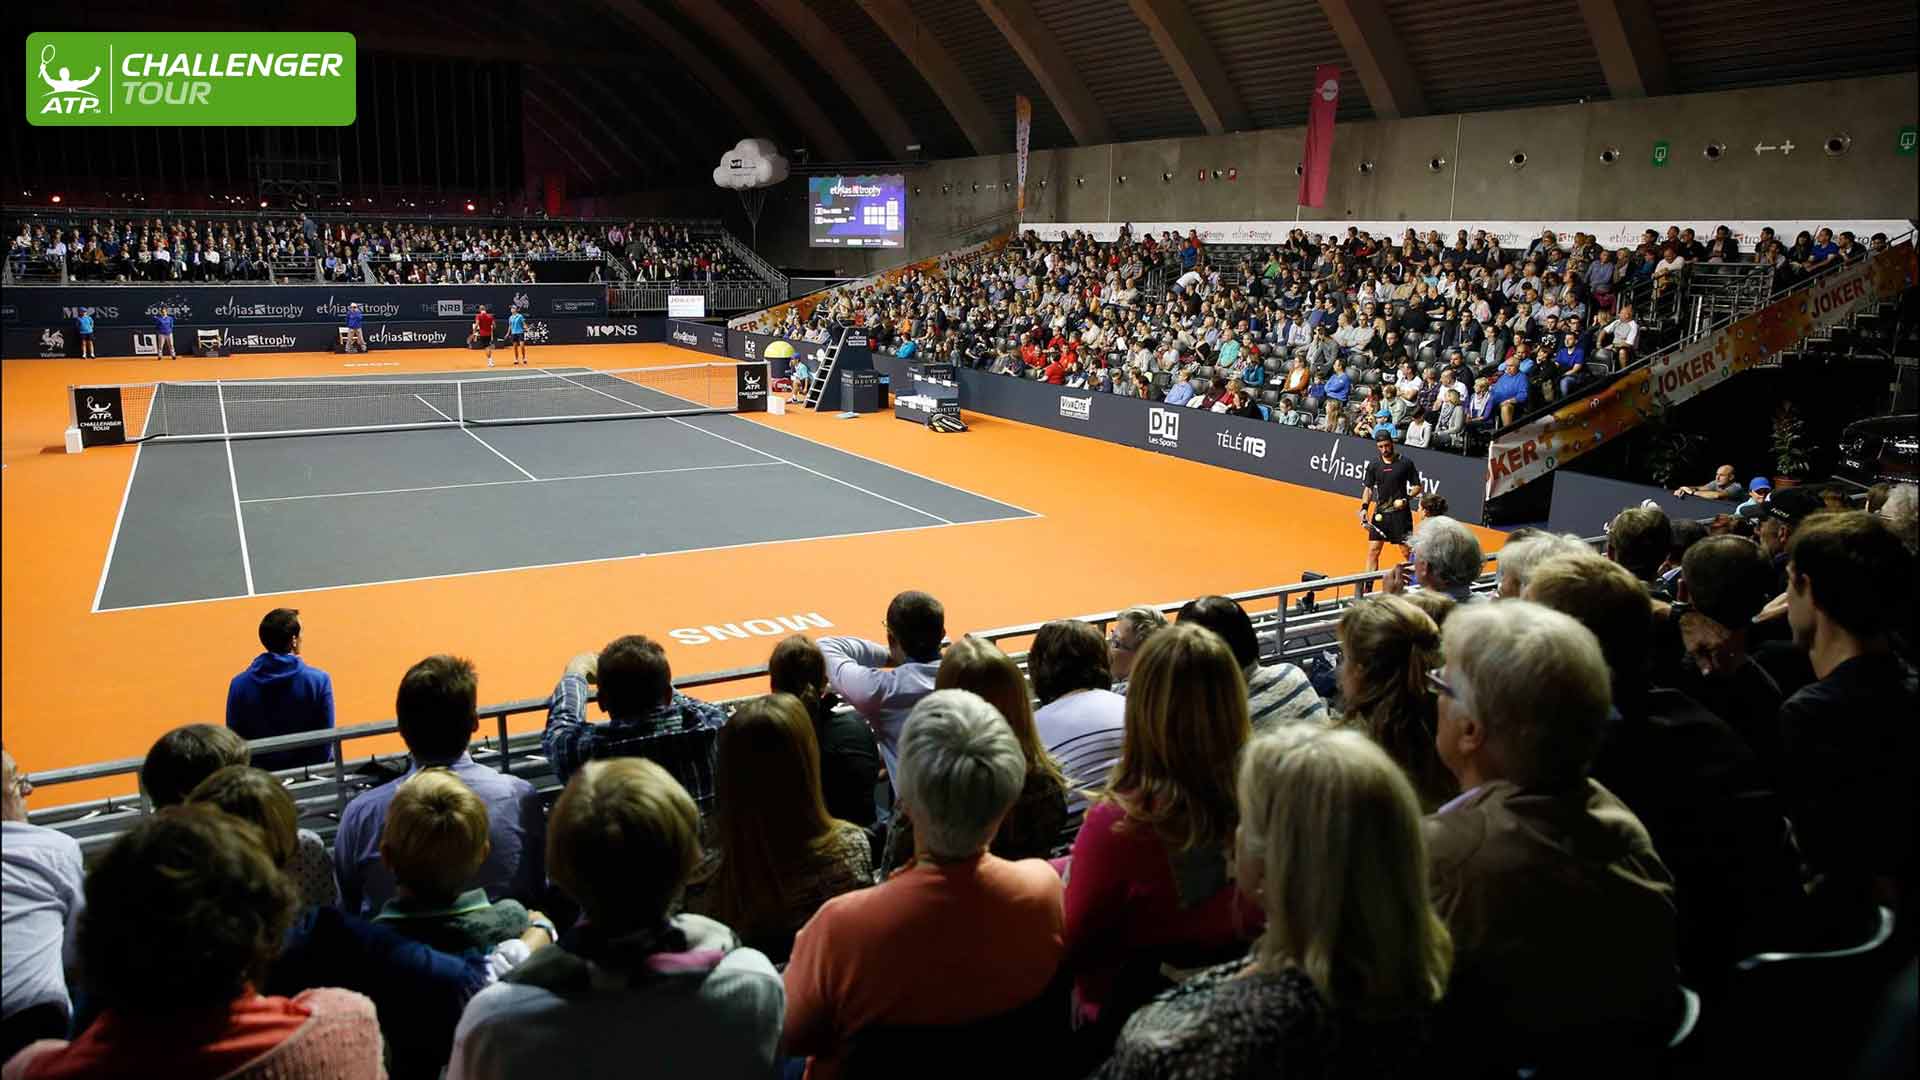 Packed crowds watch the action in Mons.